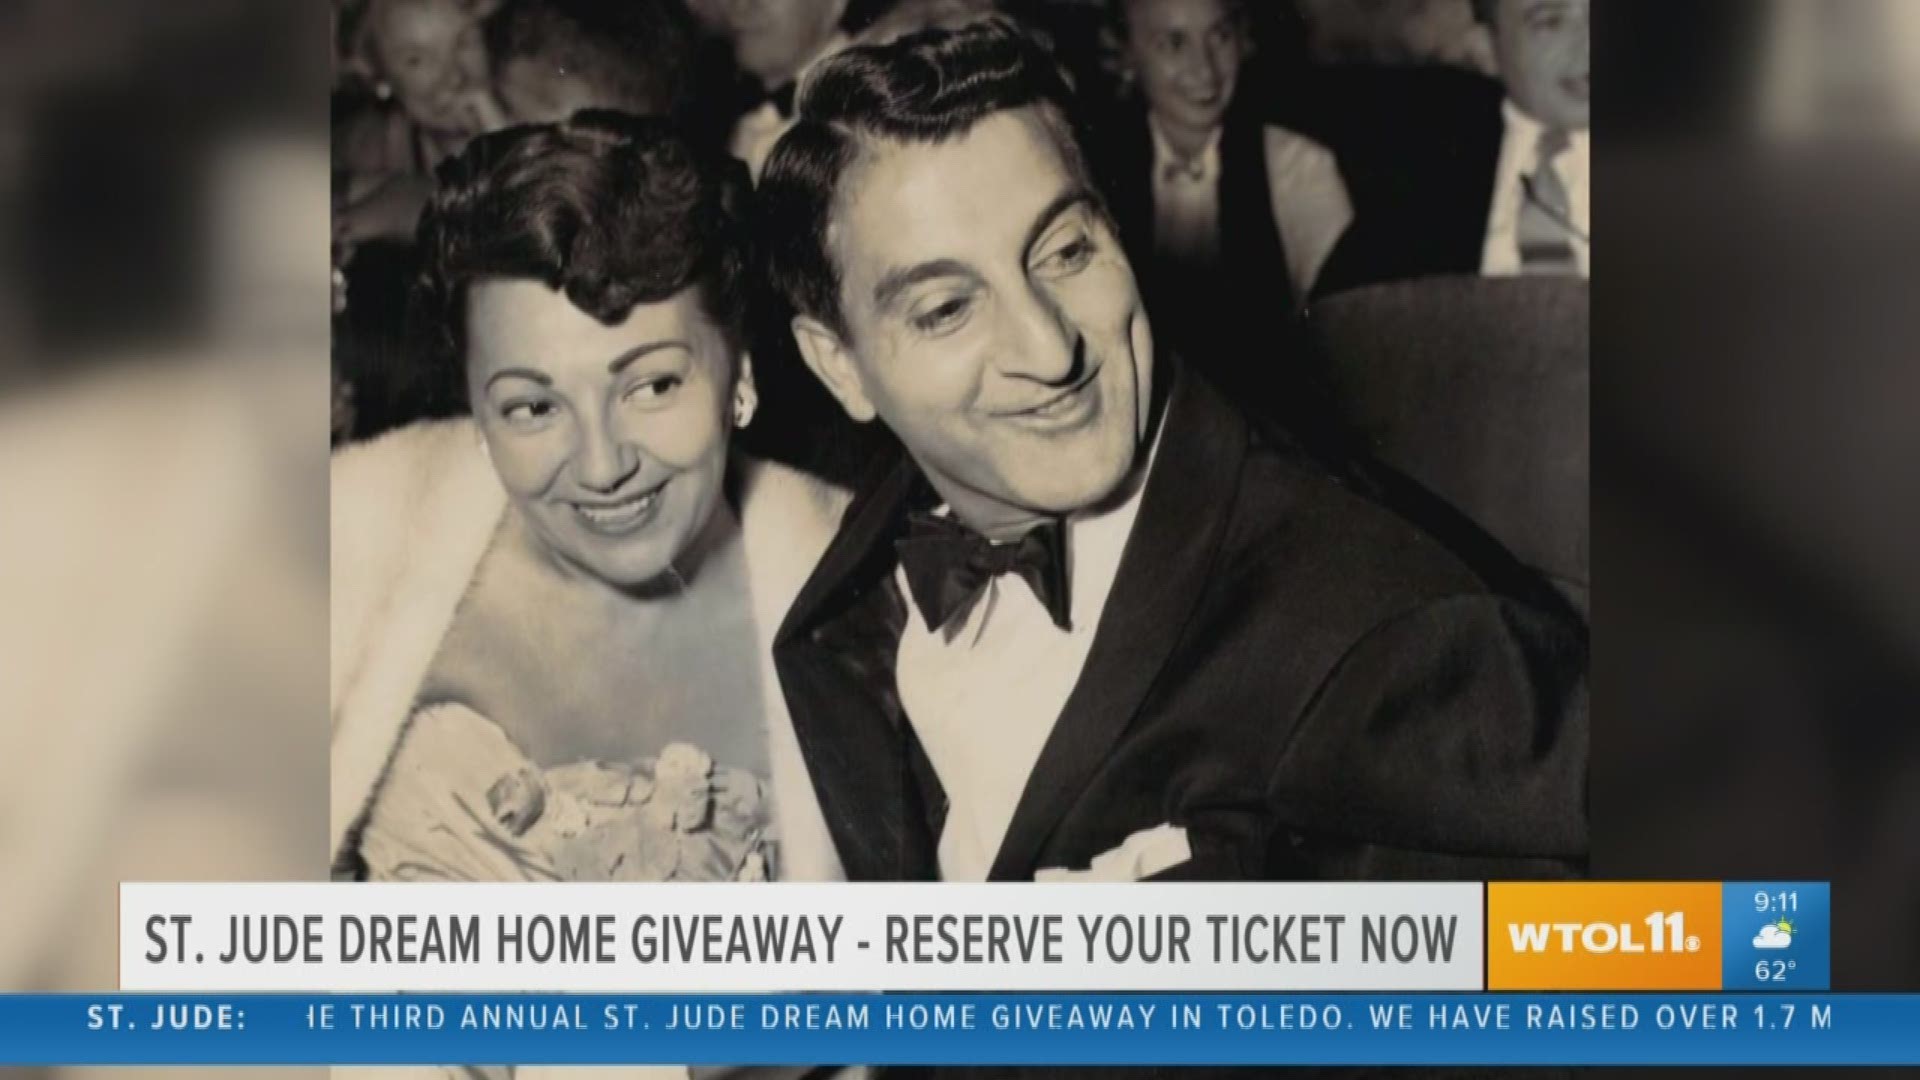 How one prayer to the saint of hopeless causes helped struggling entertainer Danny Thomas leave a legacy of helping children.